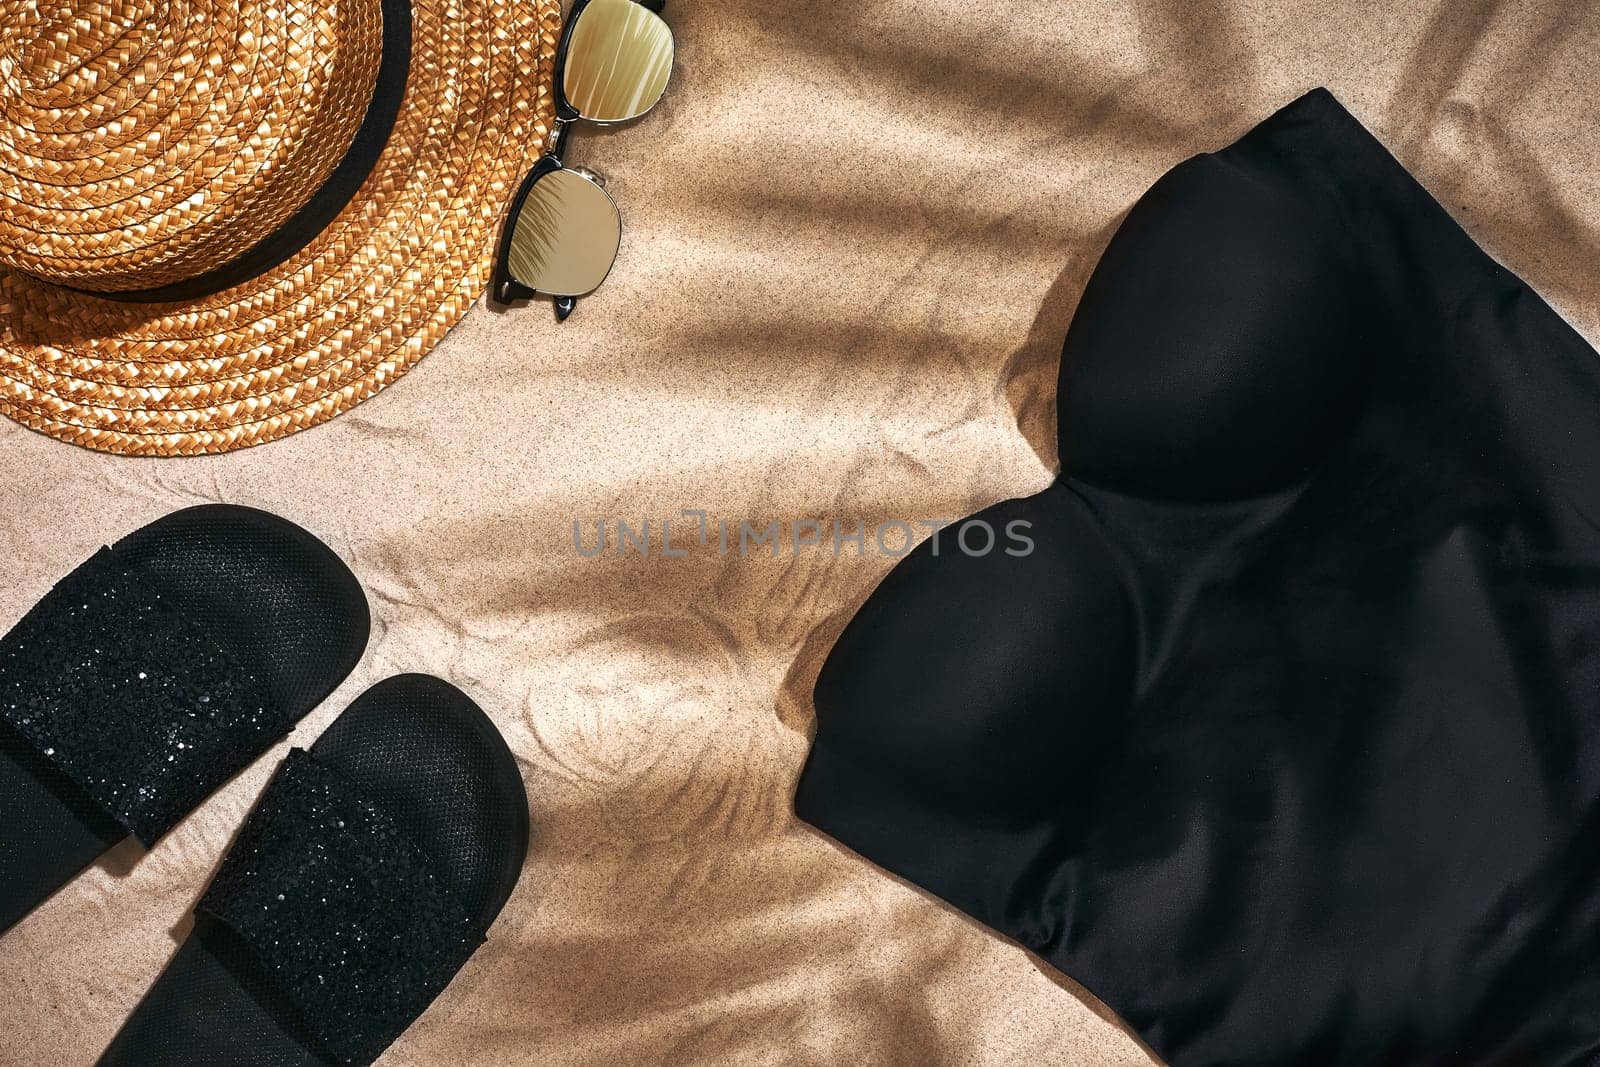 Sandal, straw hat and sunglasses on a sandy background with a shadow from a palm leaf, top view. Still life. Copy space. Flat lay.